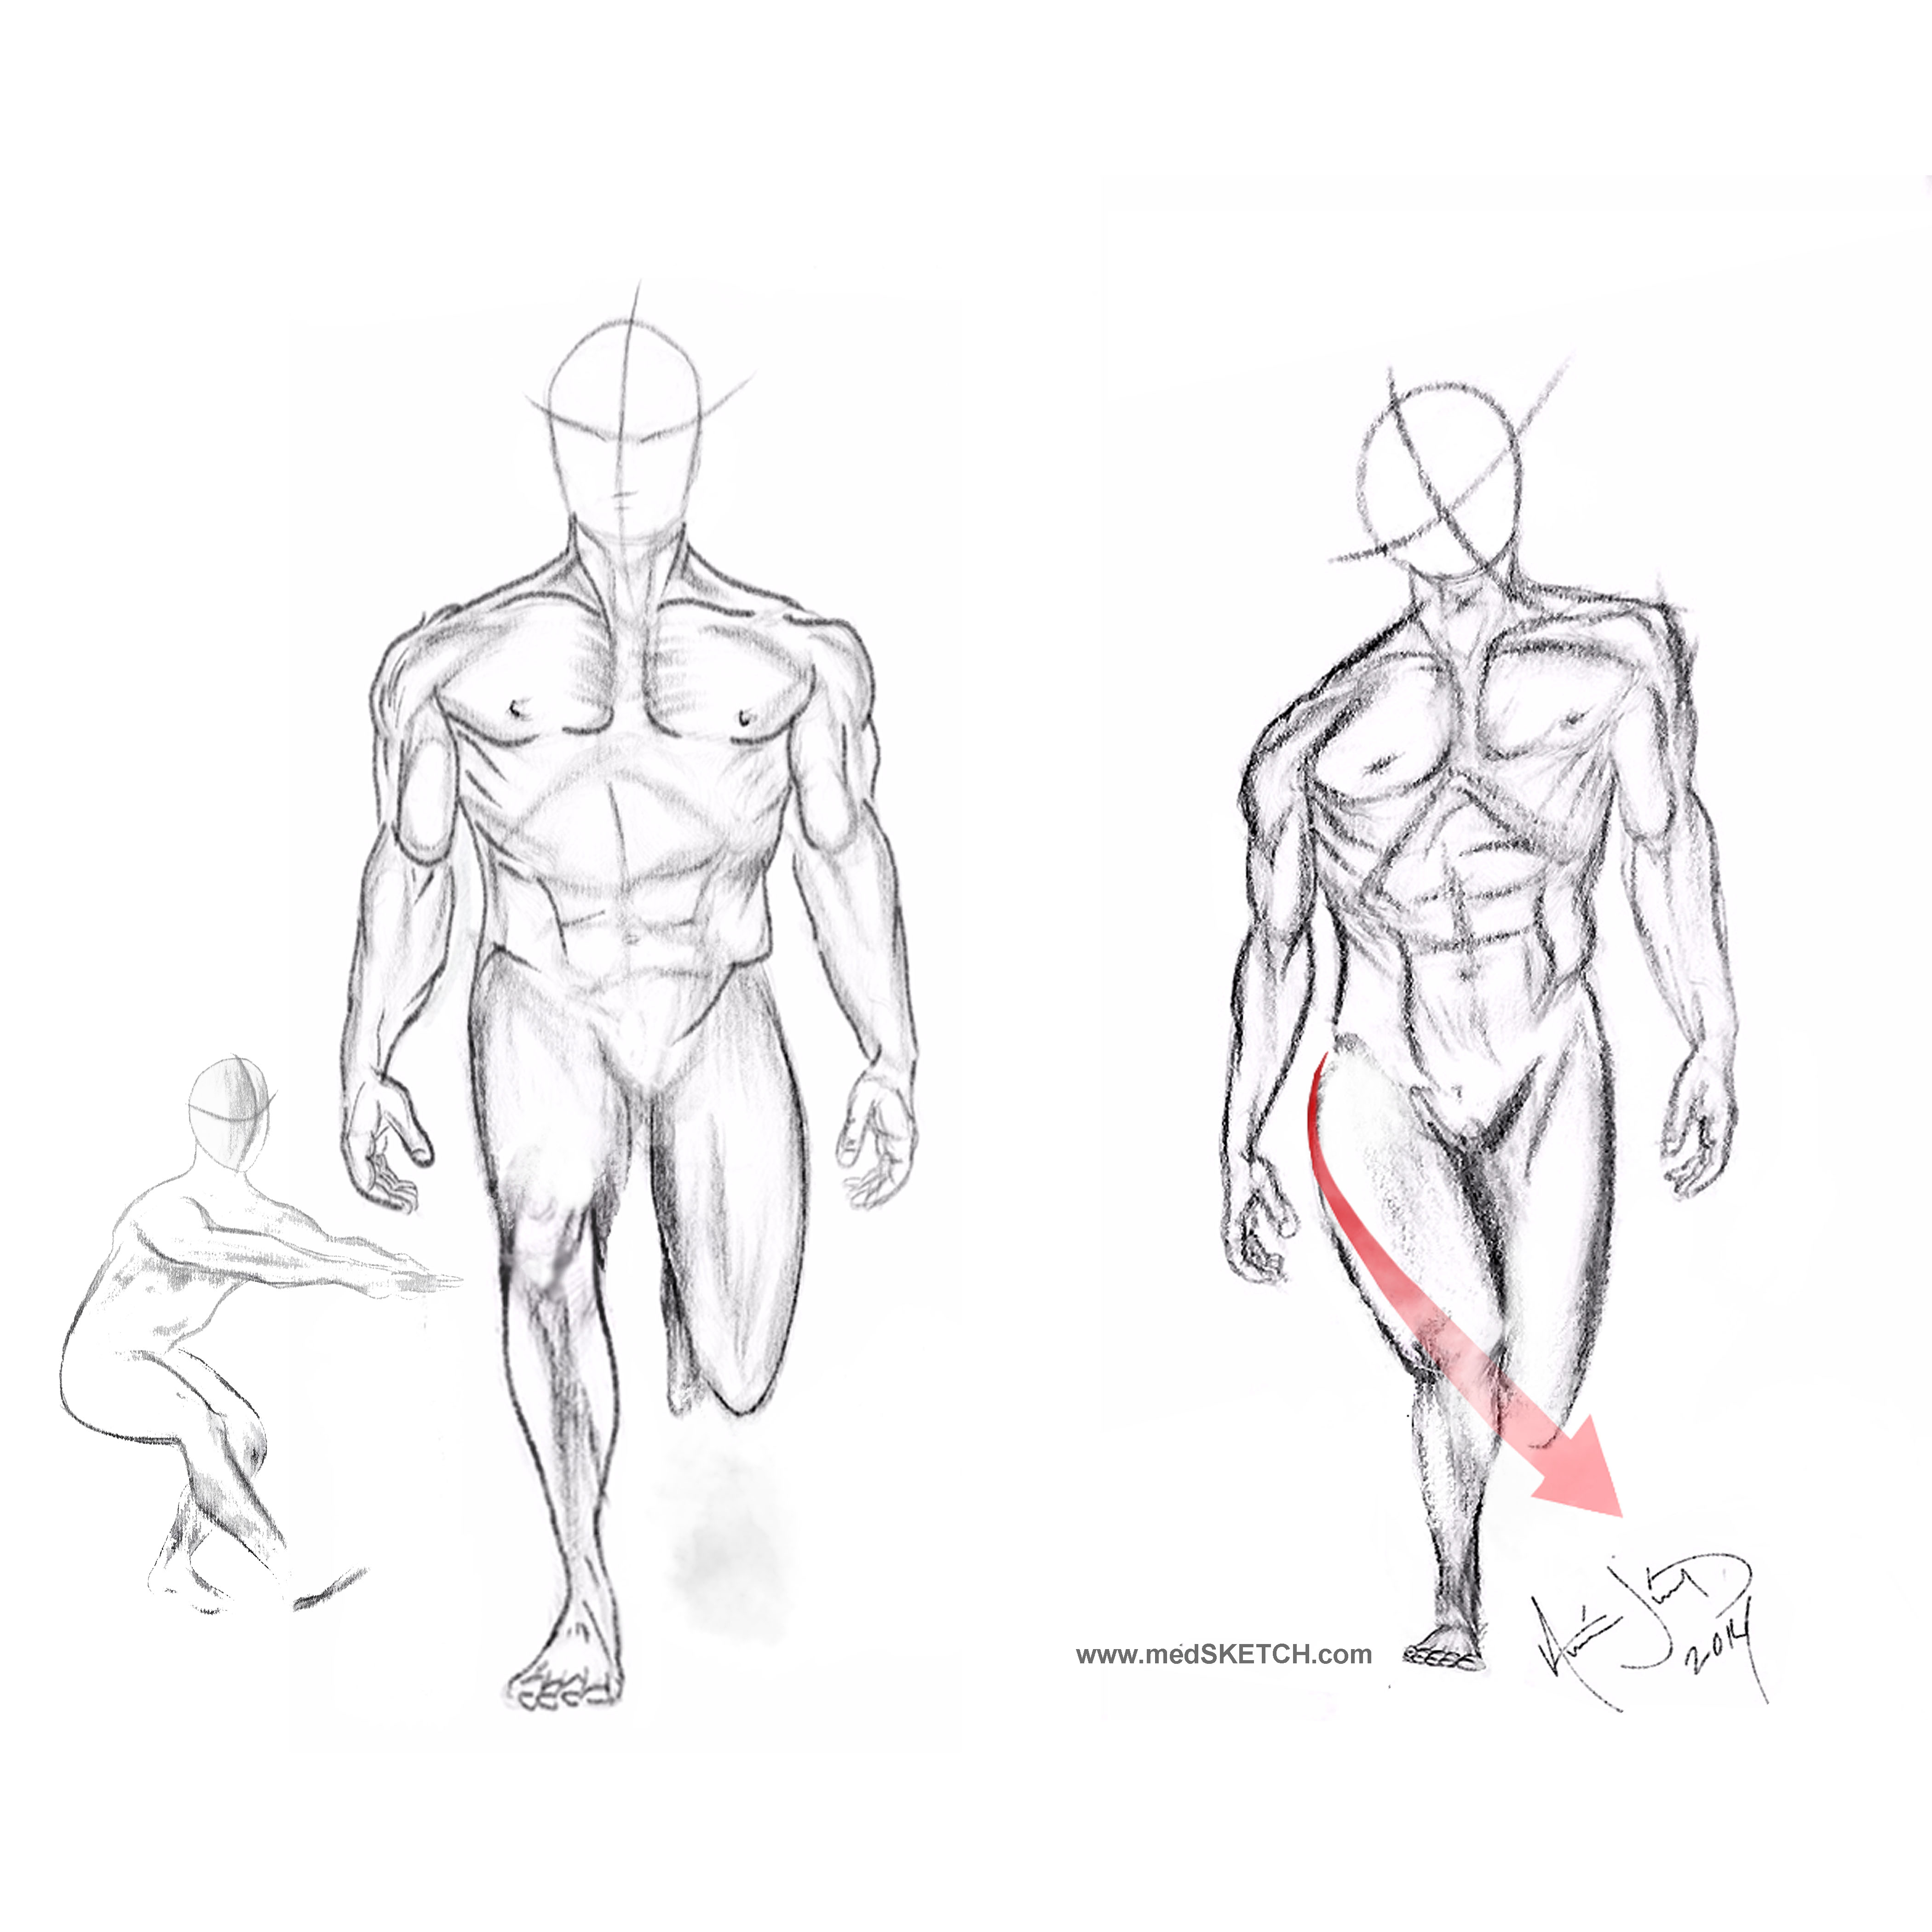 Figure 4.  Testing for gluteus maximus weakness.  Clinical testing of the GM can be done by having the patient perform a one leg squat or hop or by watching the patient descend stairs.  The knee should track down straight in alignment with the tibia and femur (left image).  If the knee migrates medially (right image), it indicates a motion pattern fault and likely a weak gluteus maximus. 